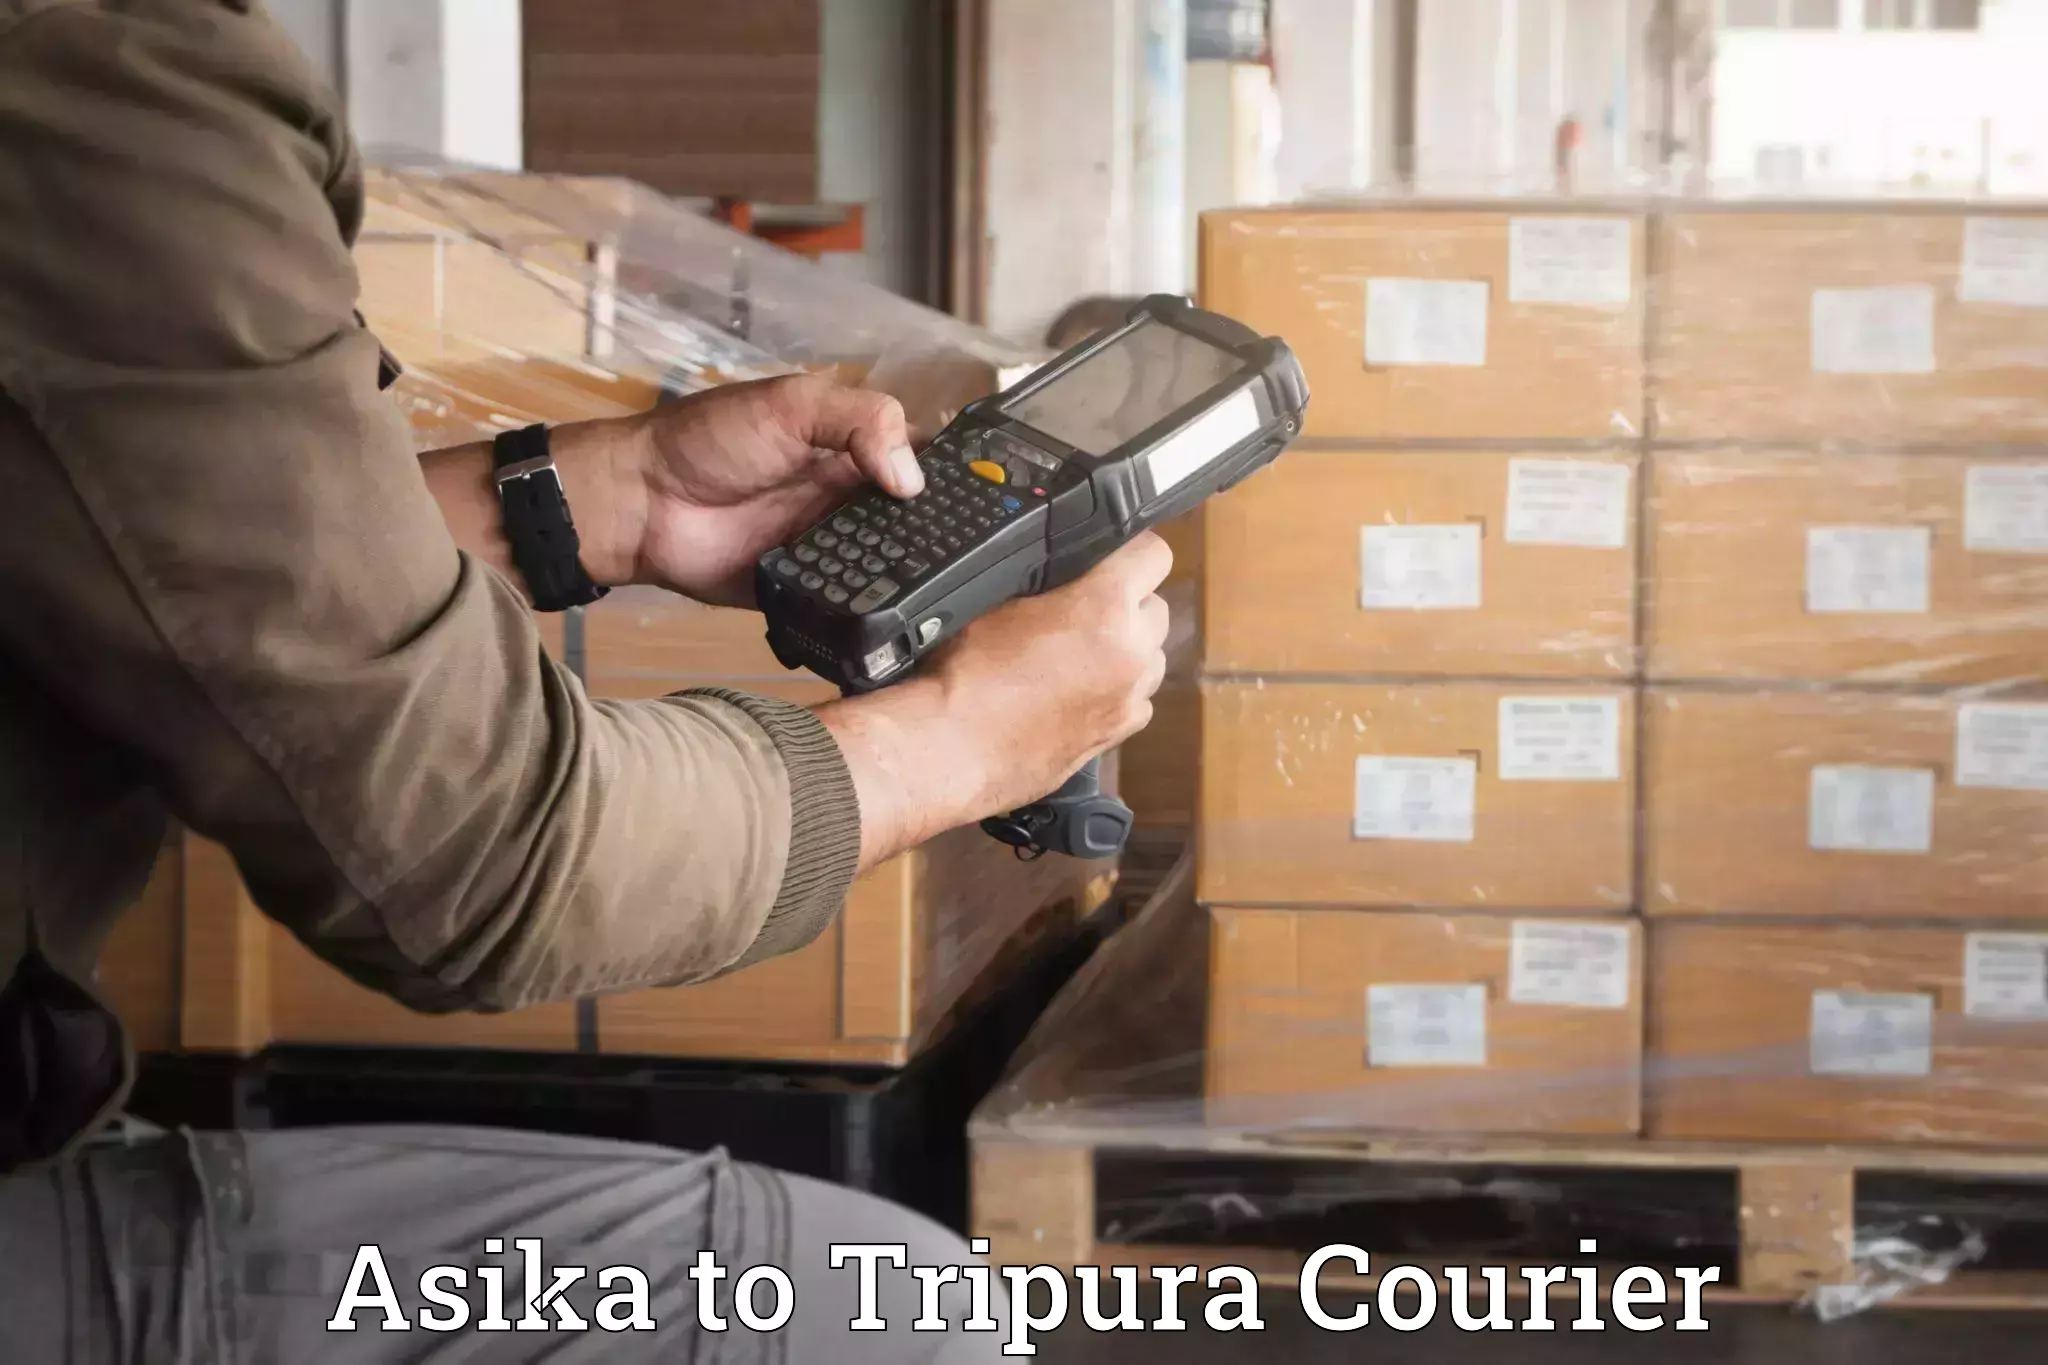 Furniture transport specialists Asika to North Tripura